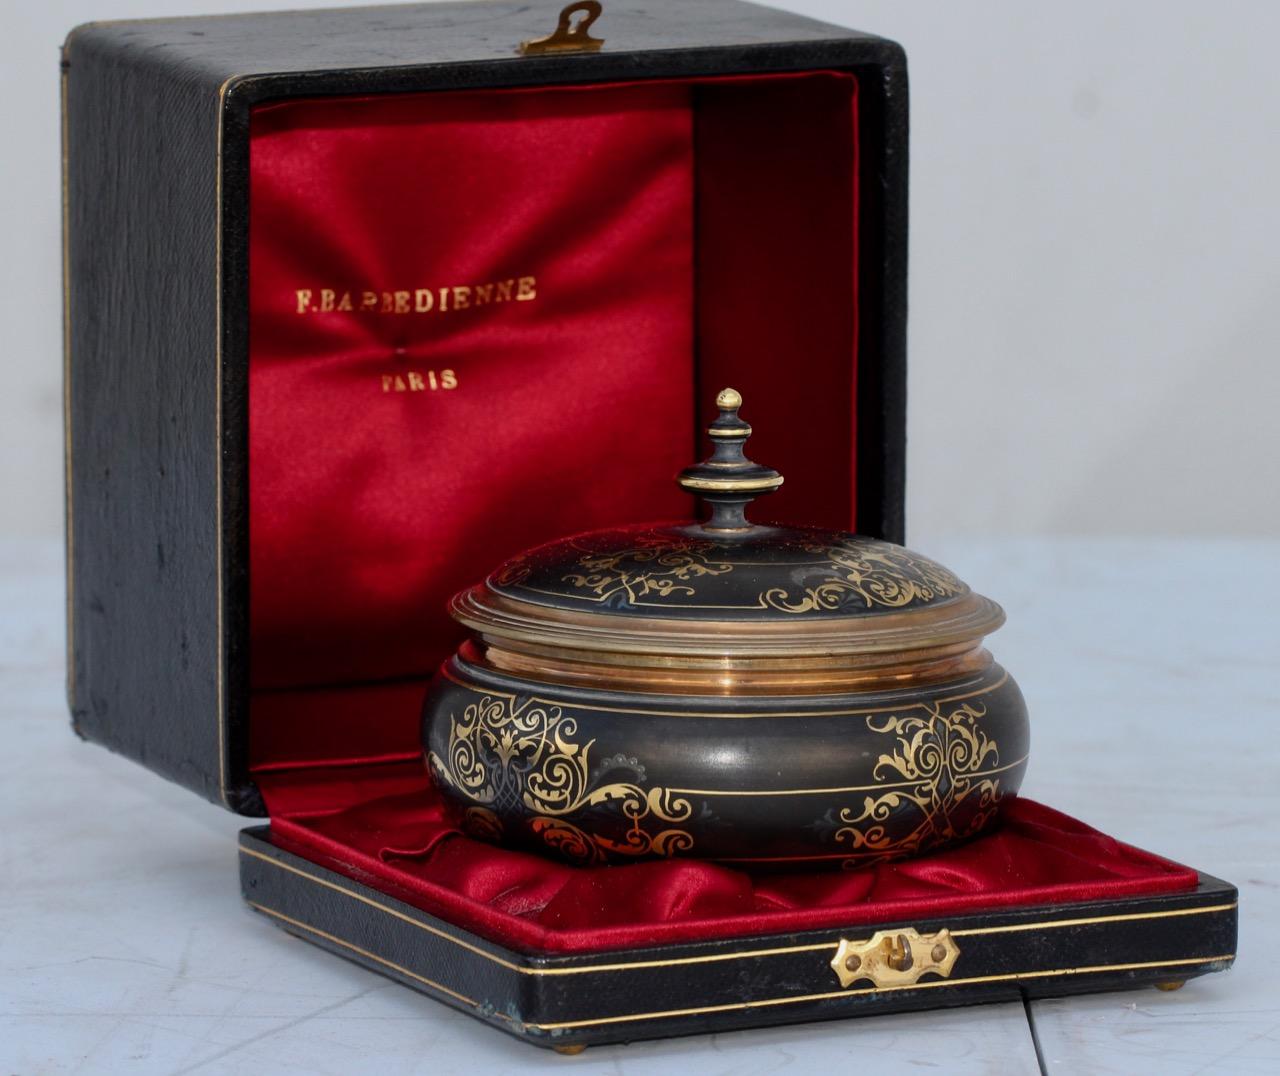 Ferdinand Barbedienne (1810-1892)
A very fine quality damascene gold and silver inlaid and patinated bronze circular box, circa 1875
In original black leather and red silk fitted box (H 10 cm, W 14 cm, D 12 cm).
   